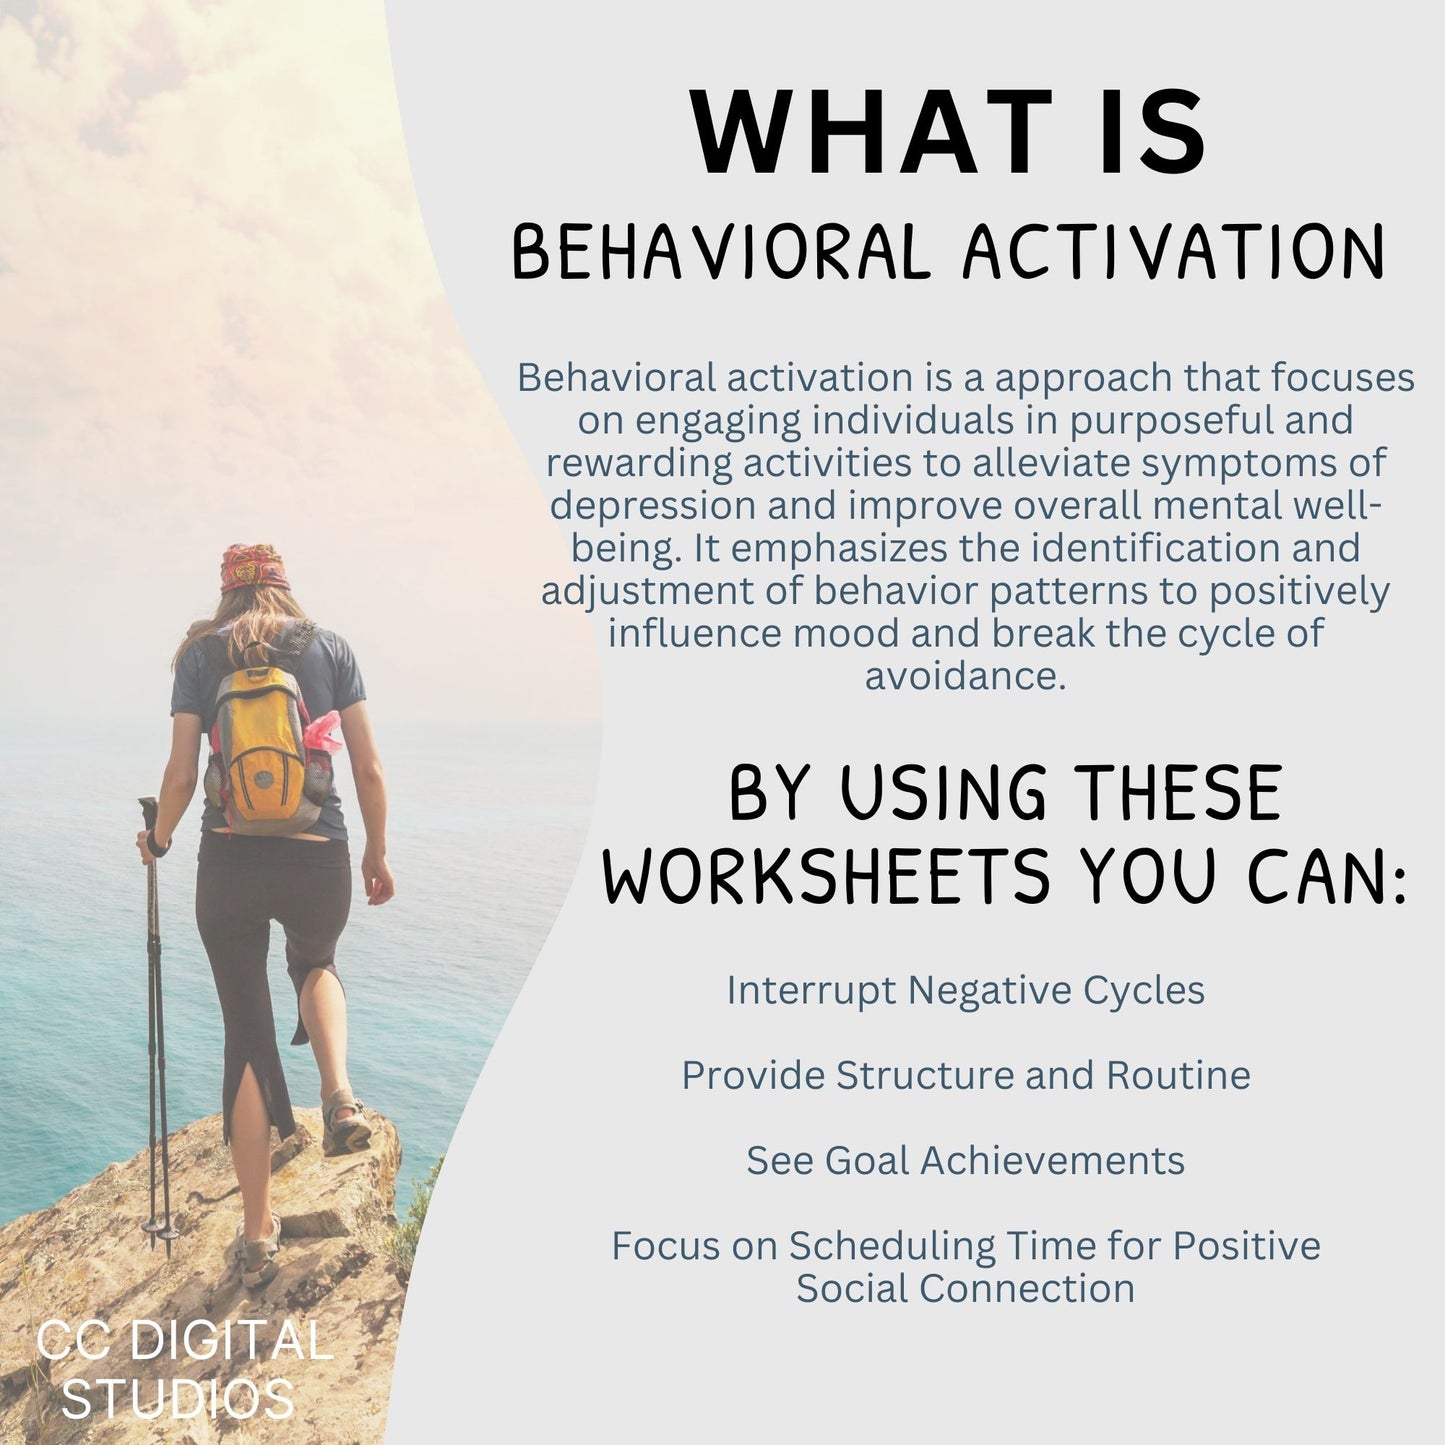 CBT Worksheets for Behavioral Activation a effective therapy resource. These worksheets can be added to your mental health workbook, designed for depression and anxiety relief, provides a structured approach for purposeful daily activities.